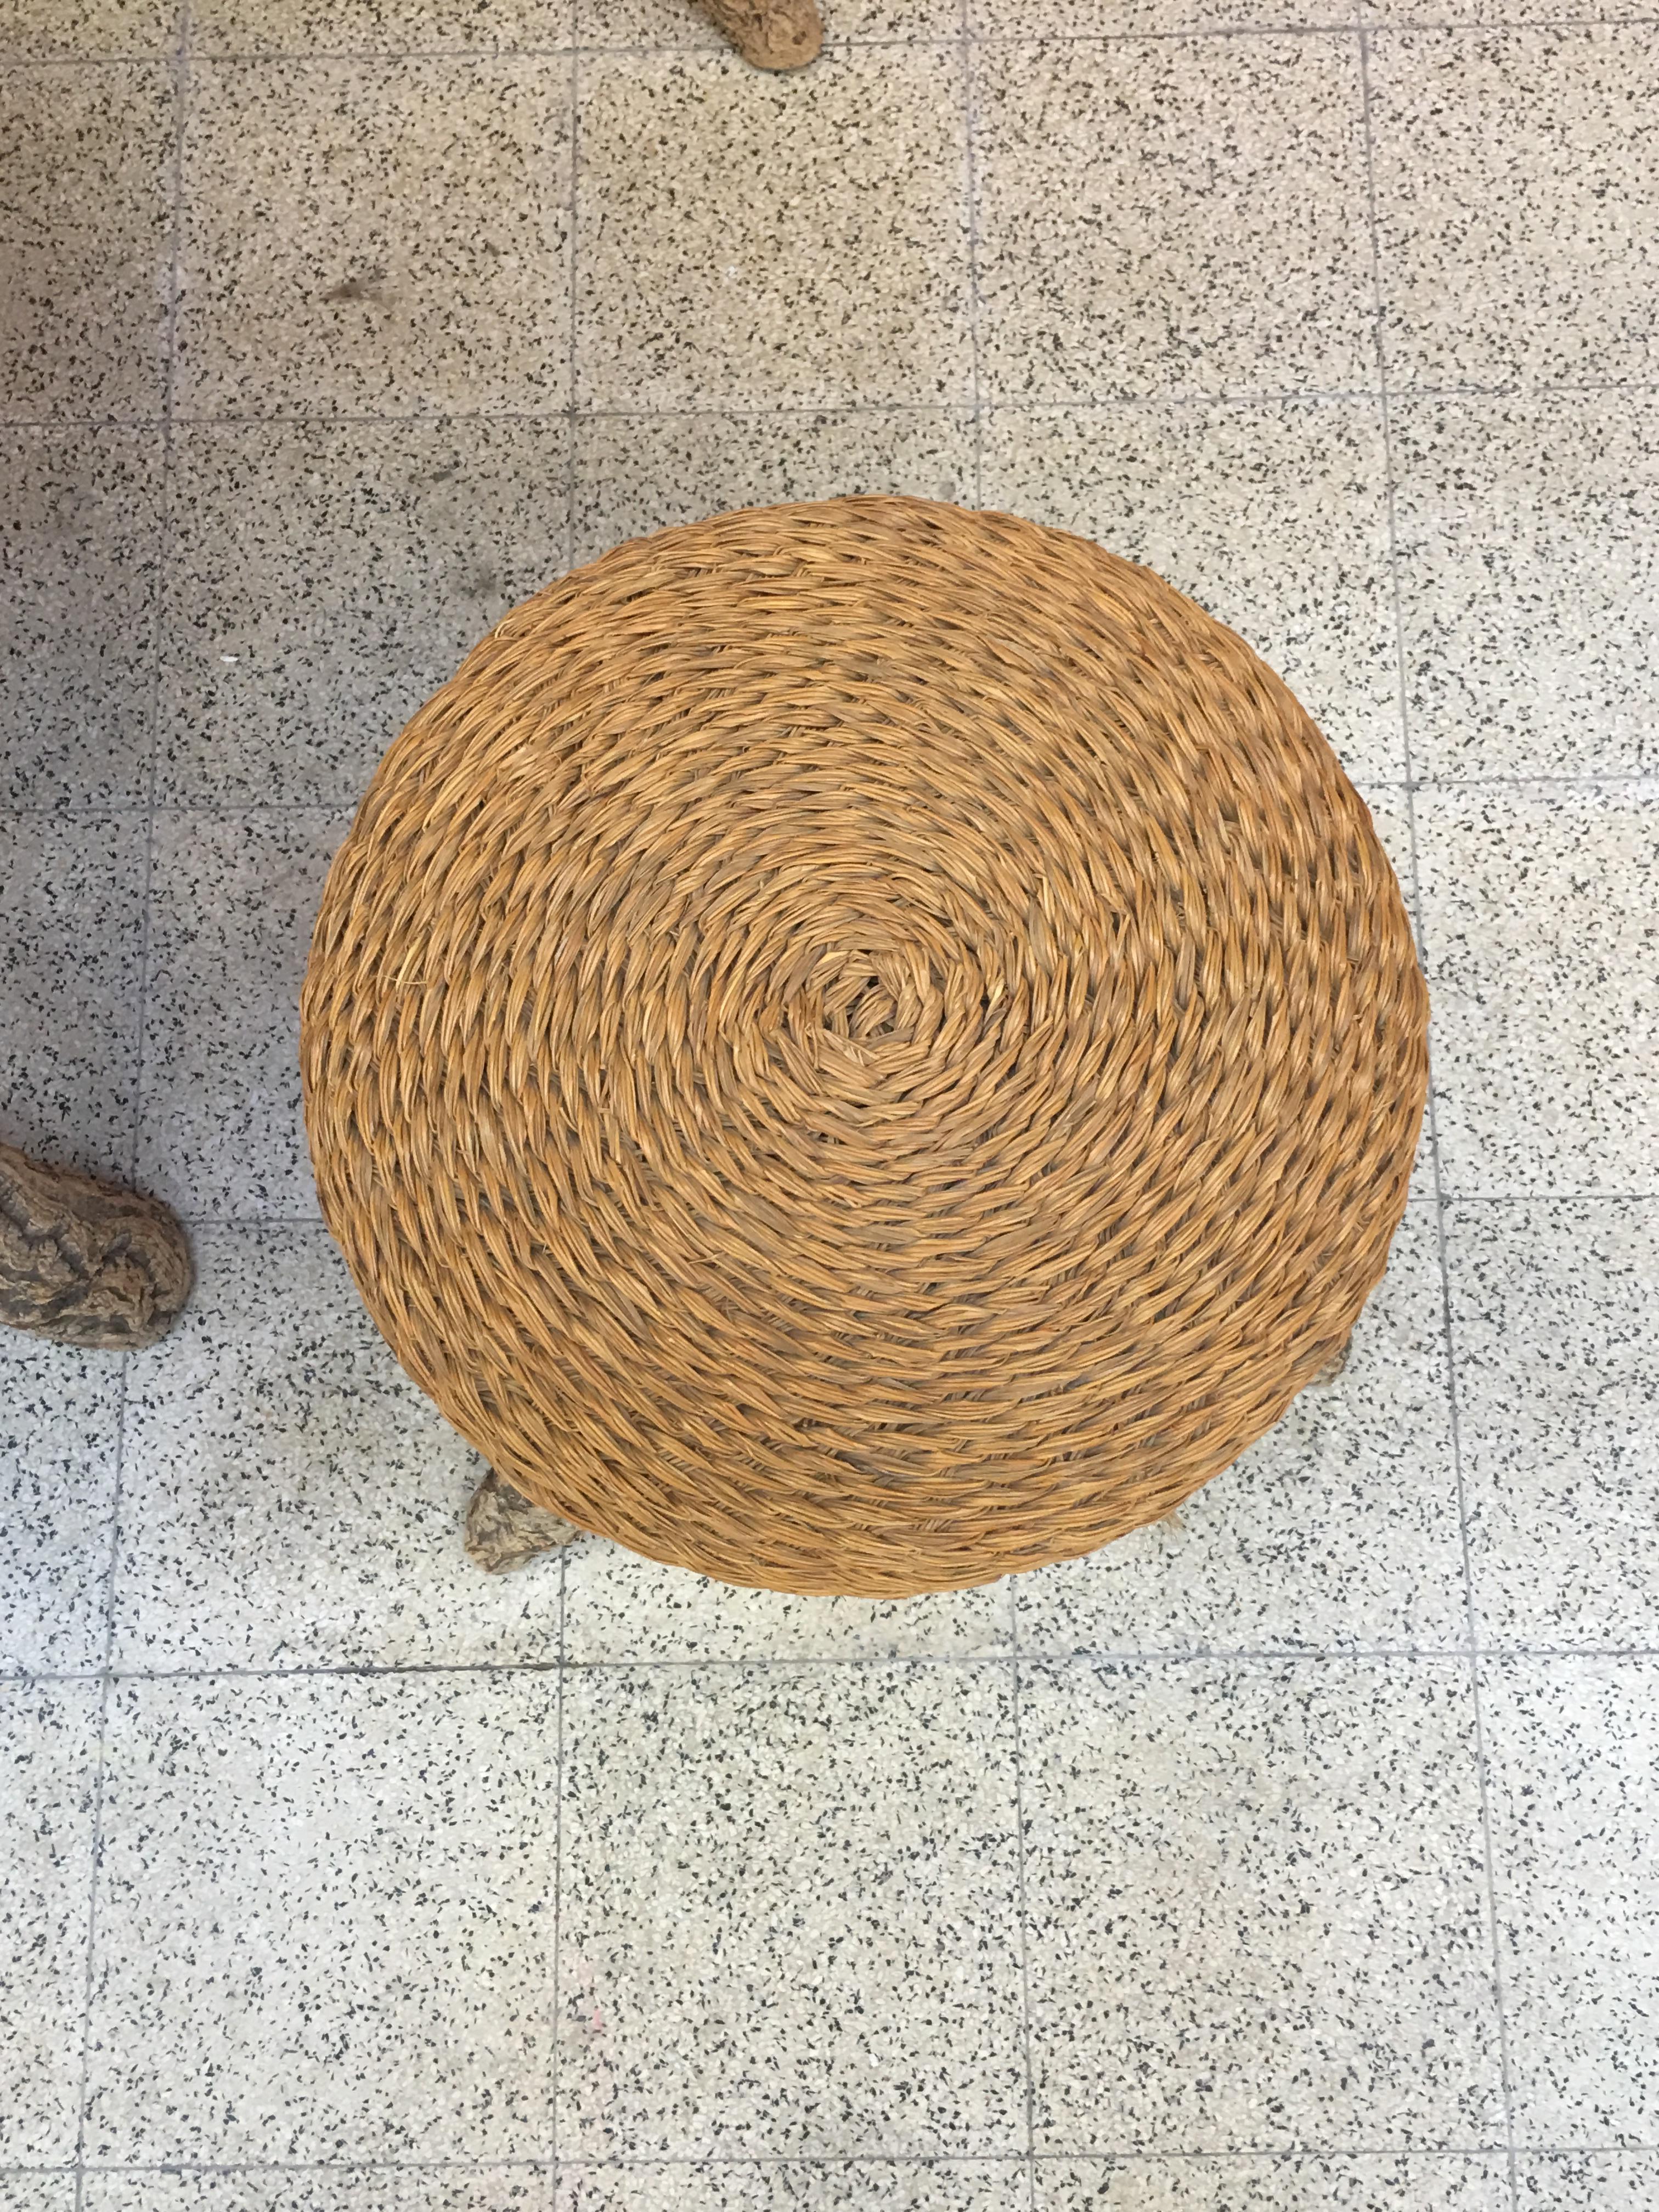 Organic Table and Its 4 Stools, Rattan, Rafia, Rope and Branches, circa 1970 For Sale 4